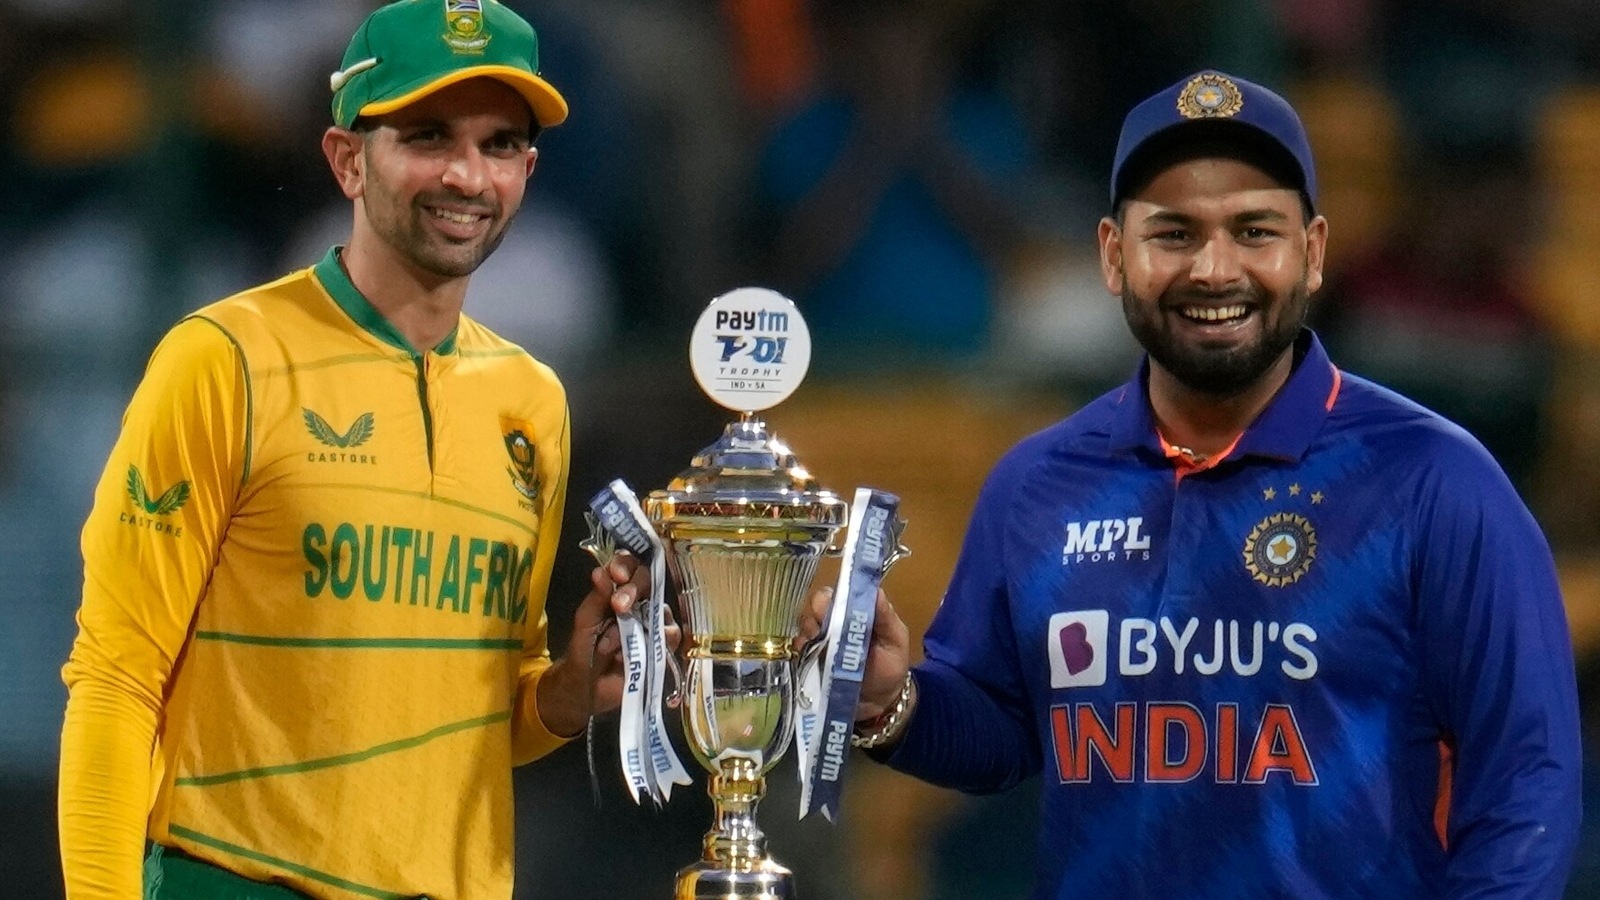 India vs South Africa 5th T20 Highlights Match called off after rain plays spoilsport; series ends level at 2-2 Hindustan Times